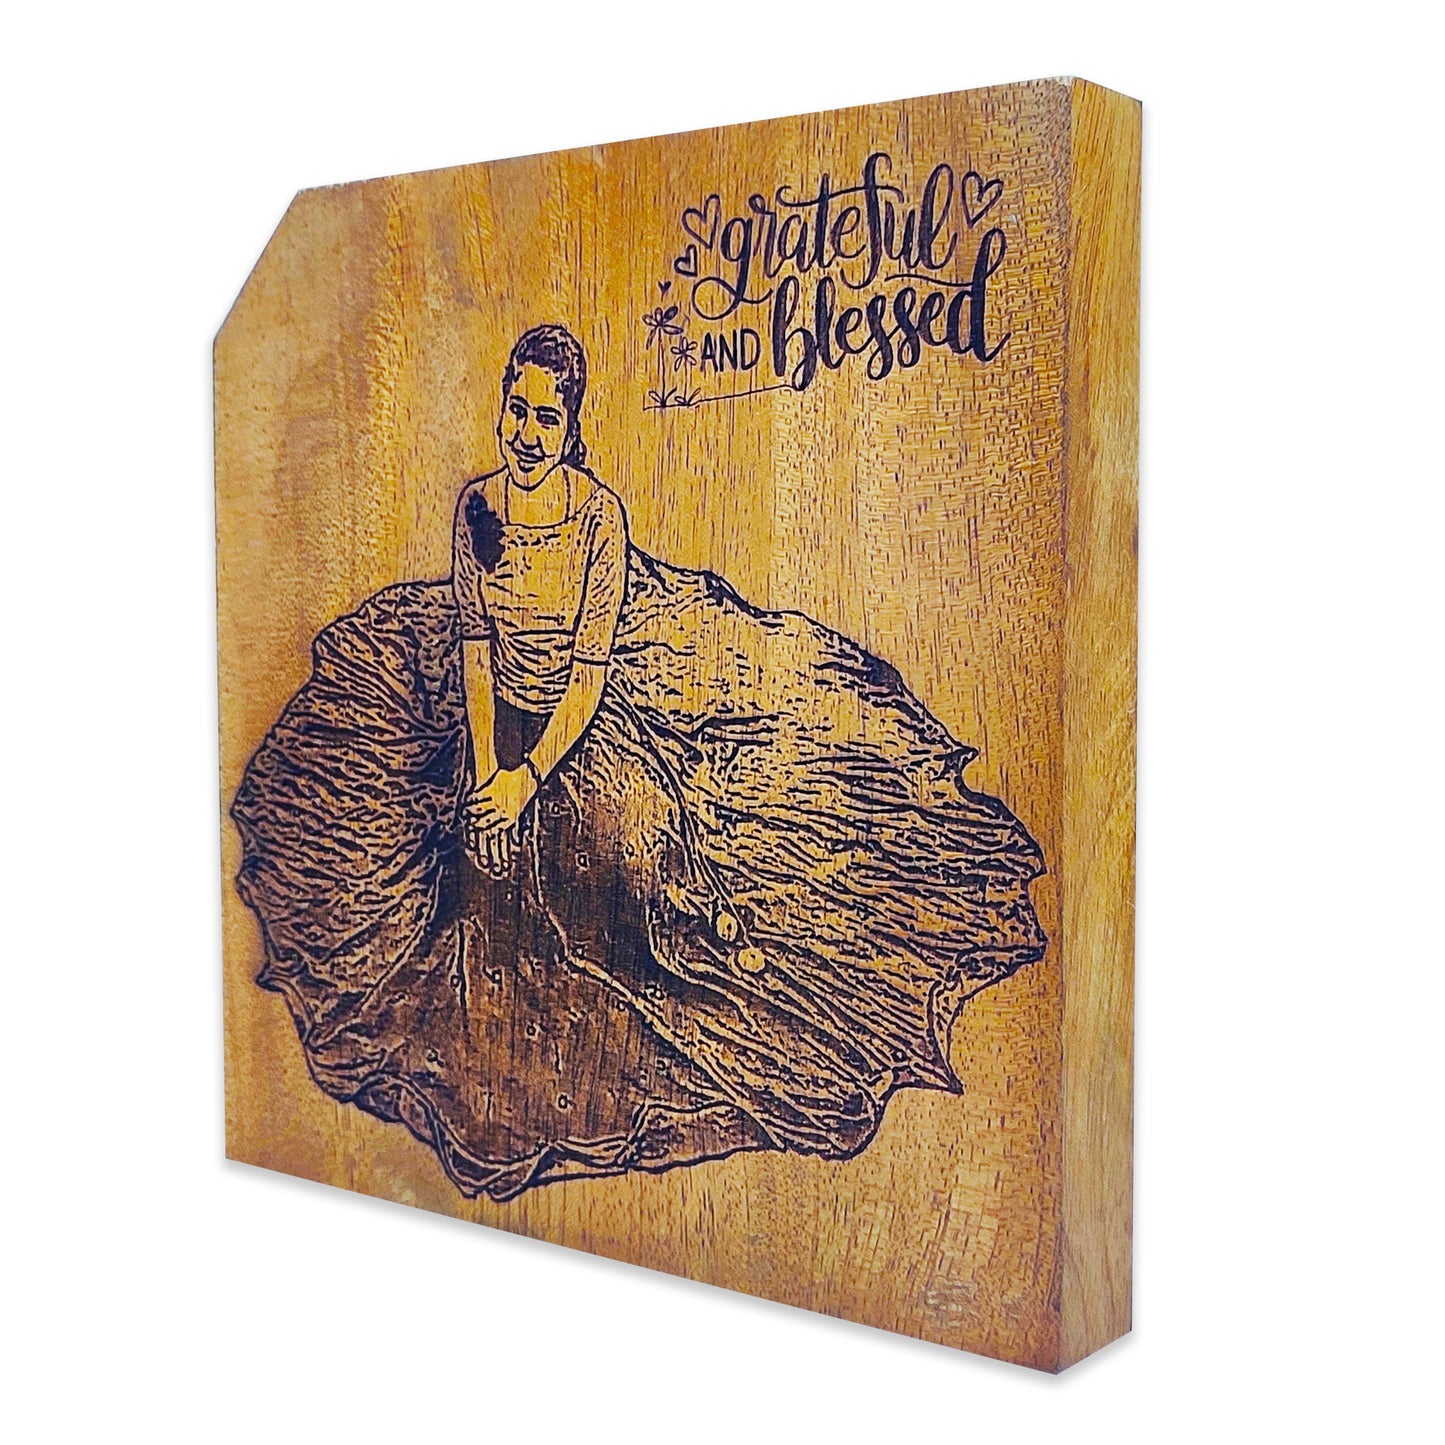 Personalized Photo Engraved Wooden Gift